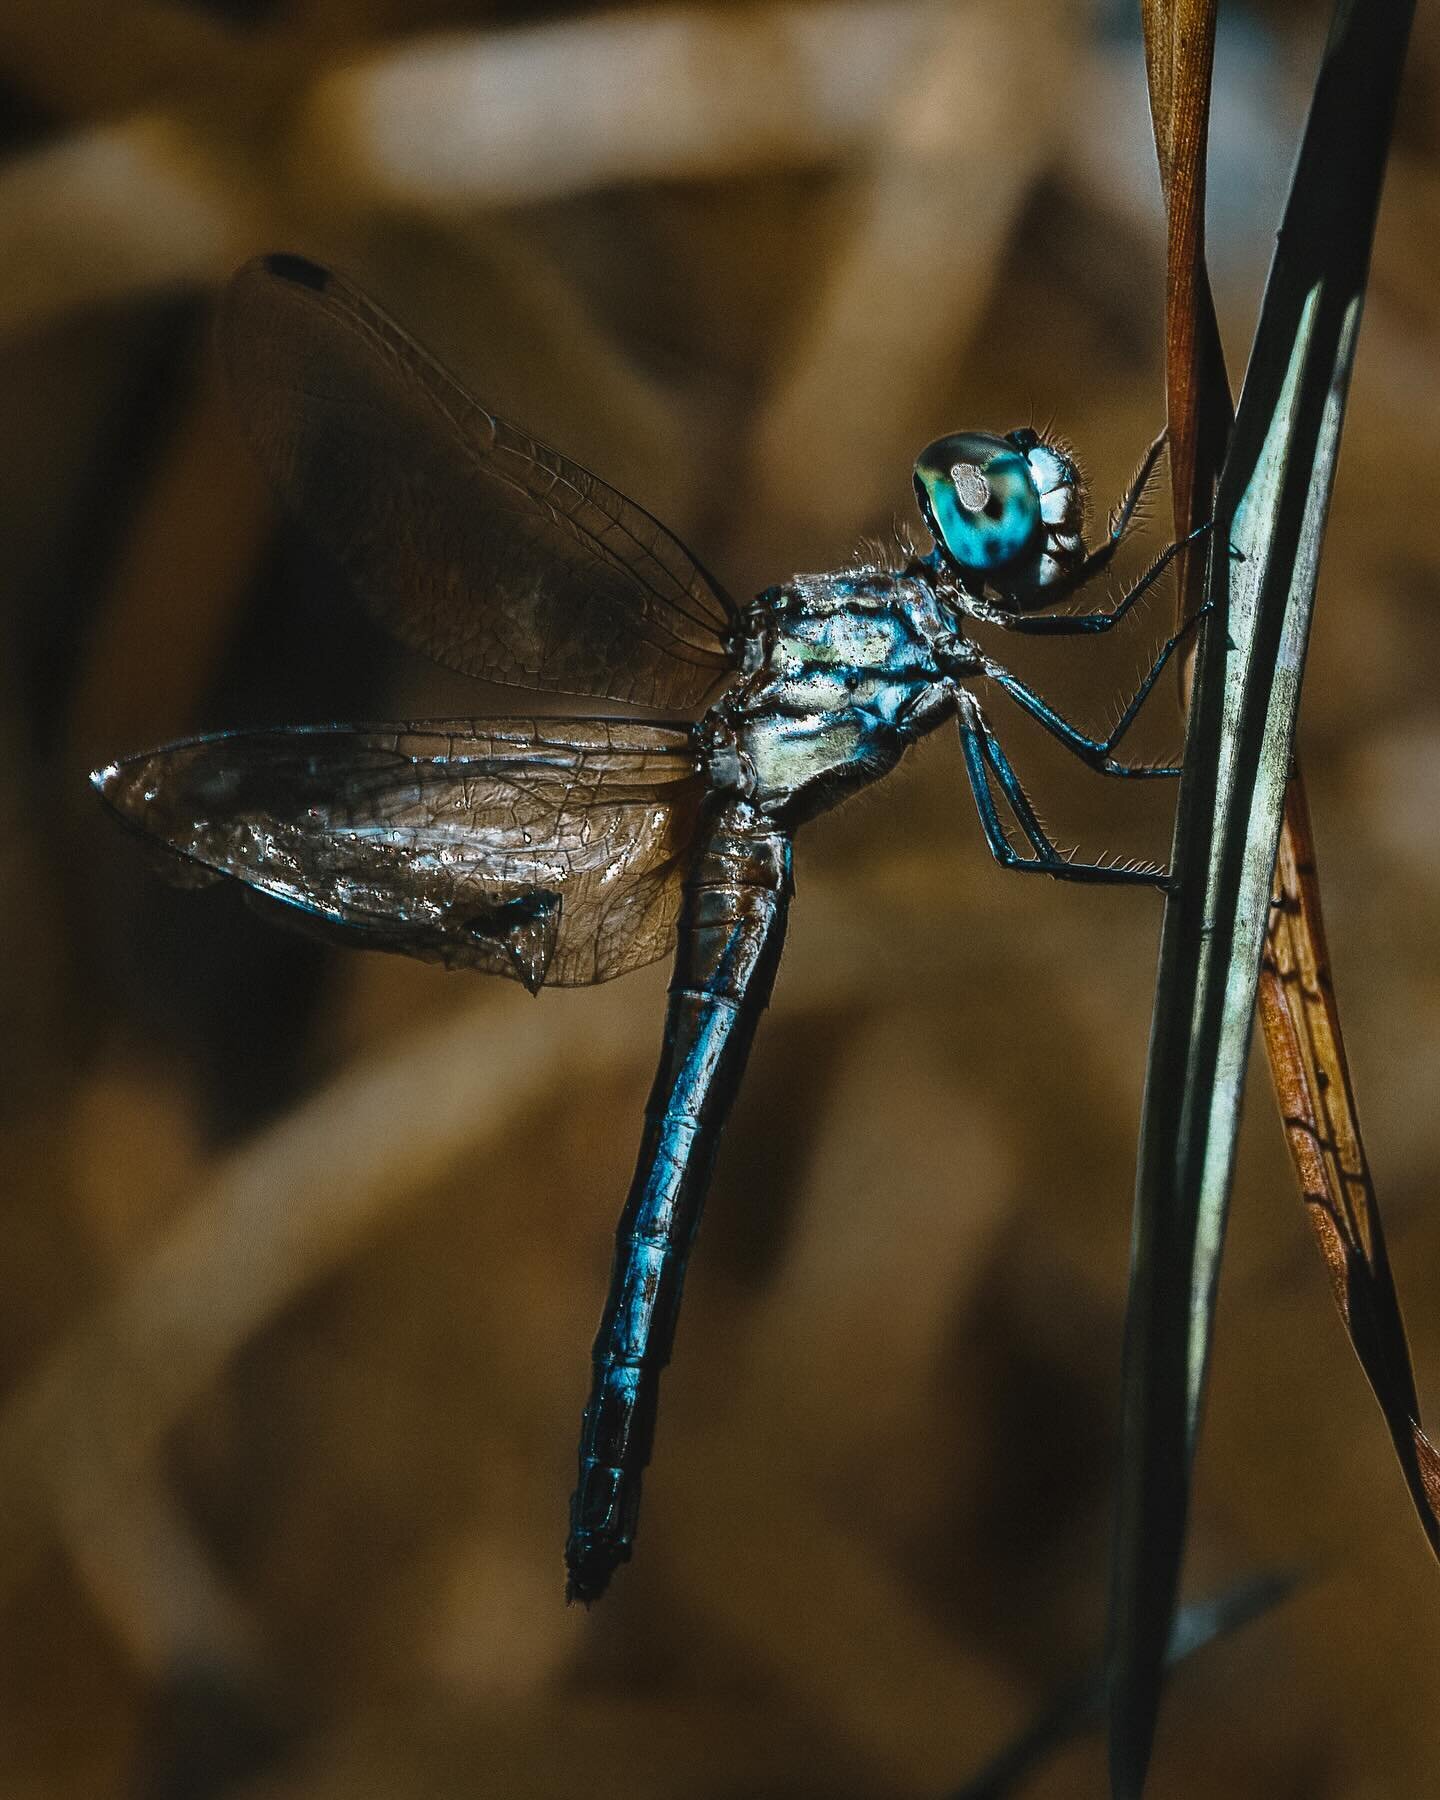 Been packing speedlites on the last couple hikes.  Turns out to be worth the weight. 🏋️
 ⠀⠀⠀⠀⠀⠀⠀⠀⠀⠀⠀⠀ 
 ⠀⠀⠀⠀⠀⠀⠀⠀⠀⠀⠀⠀ 
#dragonfly #bugboy #bugs #naturephotography 
#floridaphotography #macro #macromood 
#insectlovers #insect #macromonday #wildpath
#s